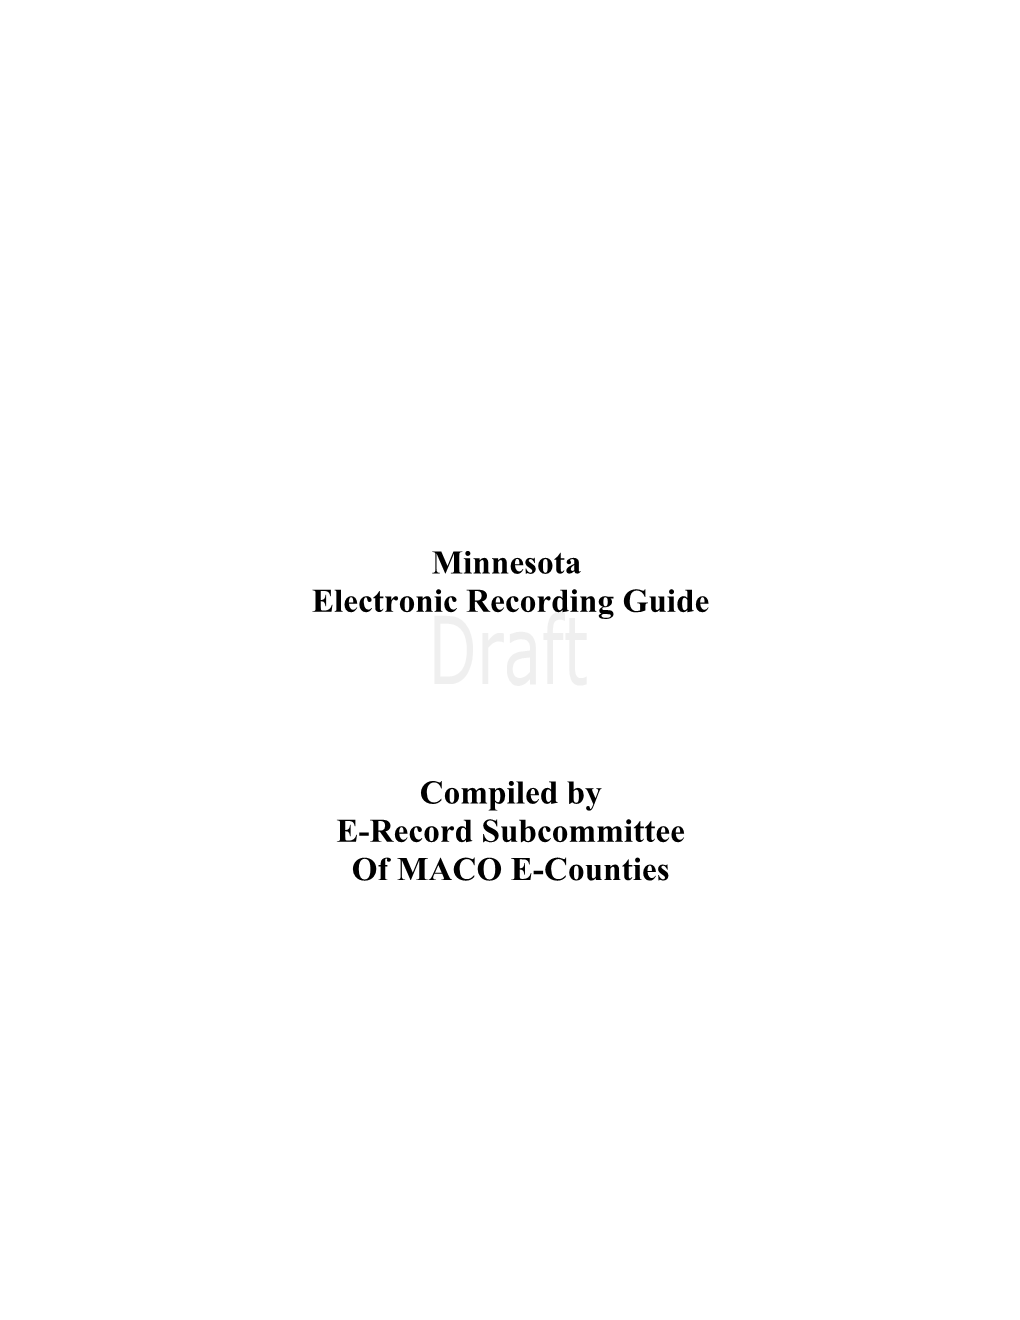 Electronic Recording Guide